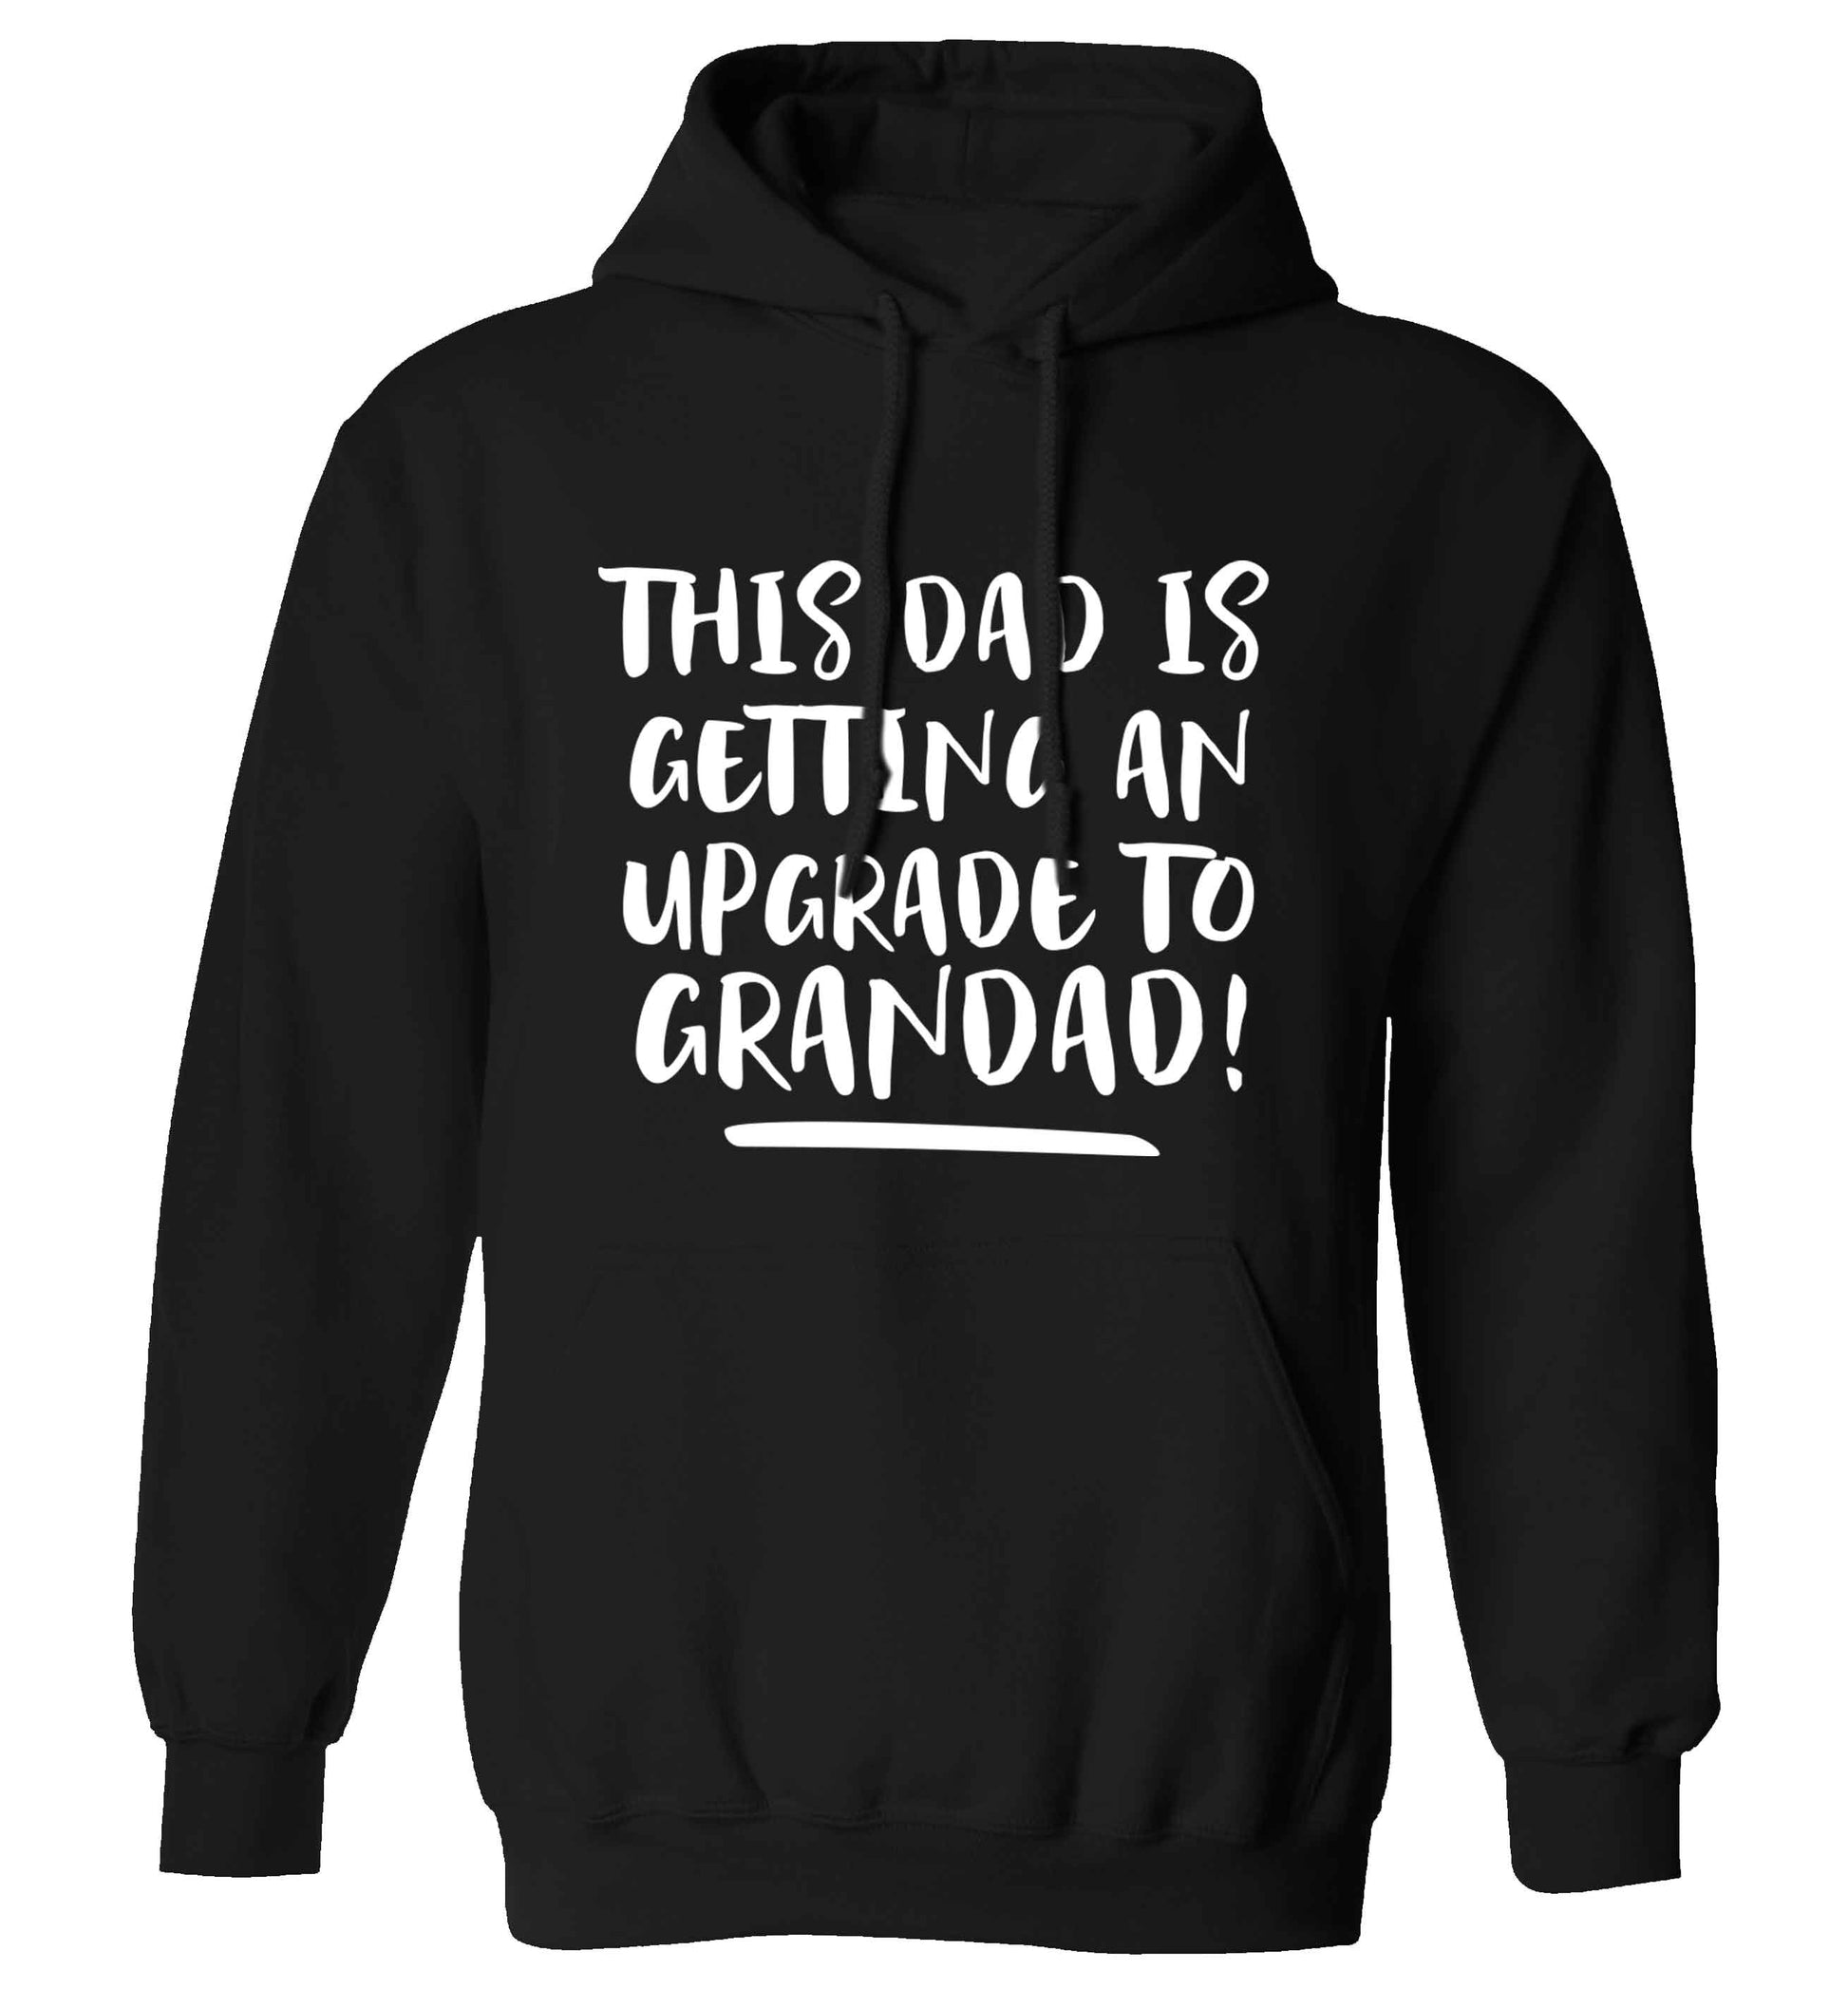 This dad is getting an upgrade to grandad! adults unisex black hoodie 2XL